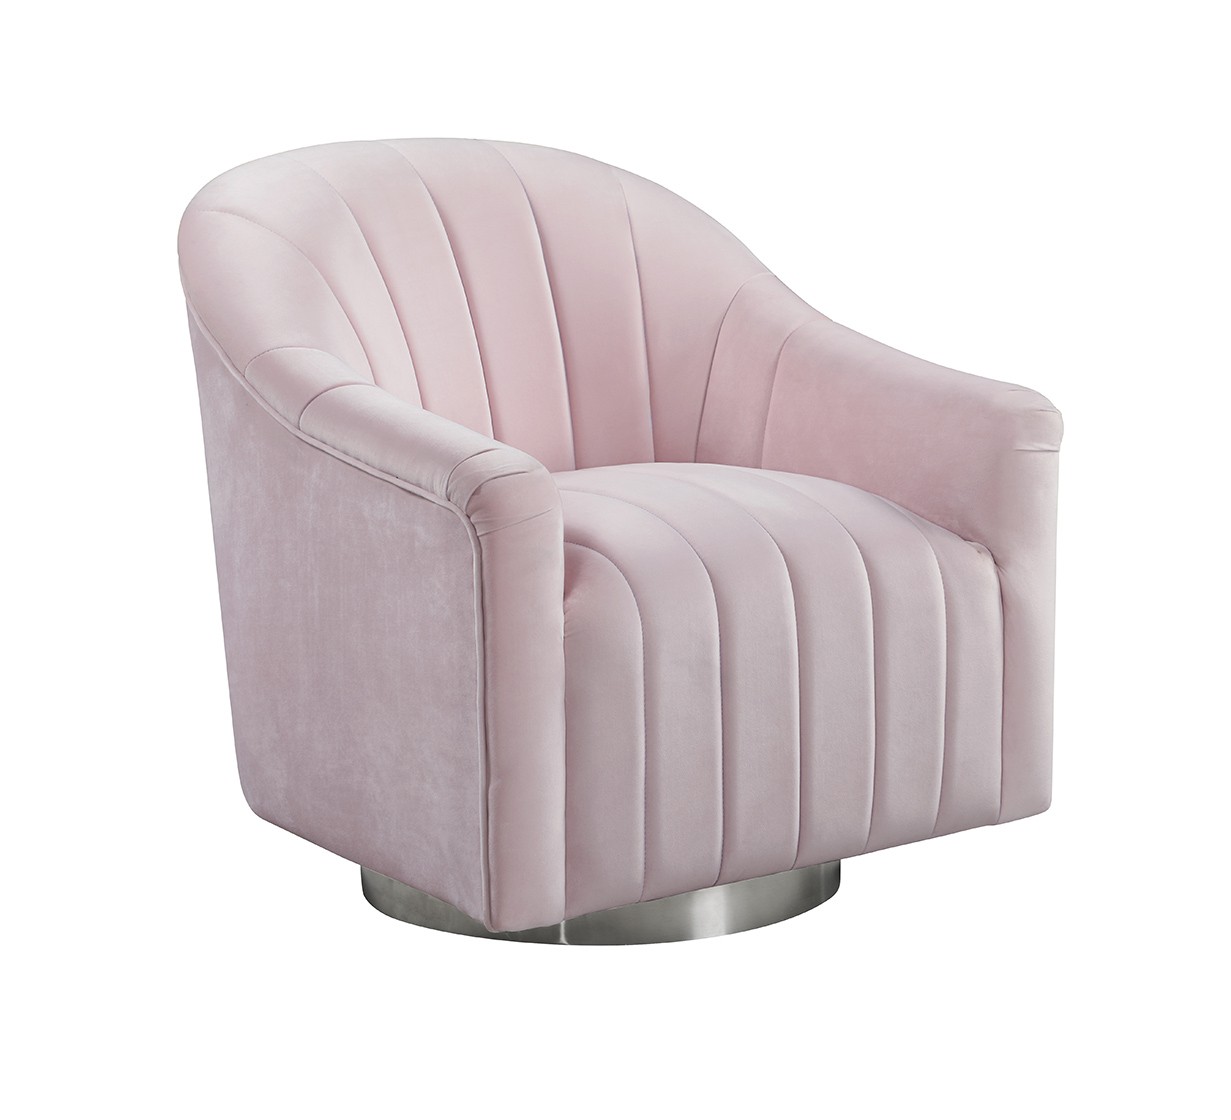 Paxi swivel chair pink iippy